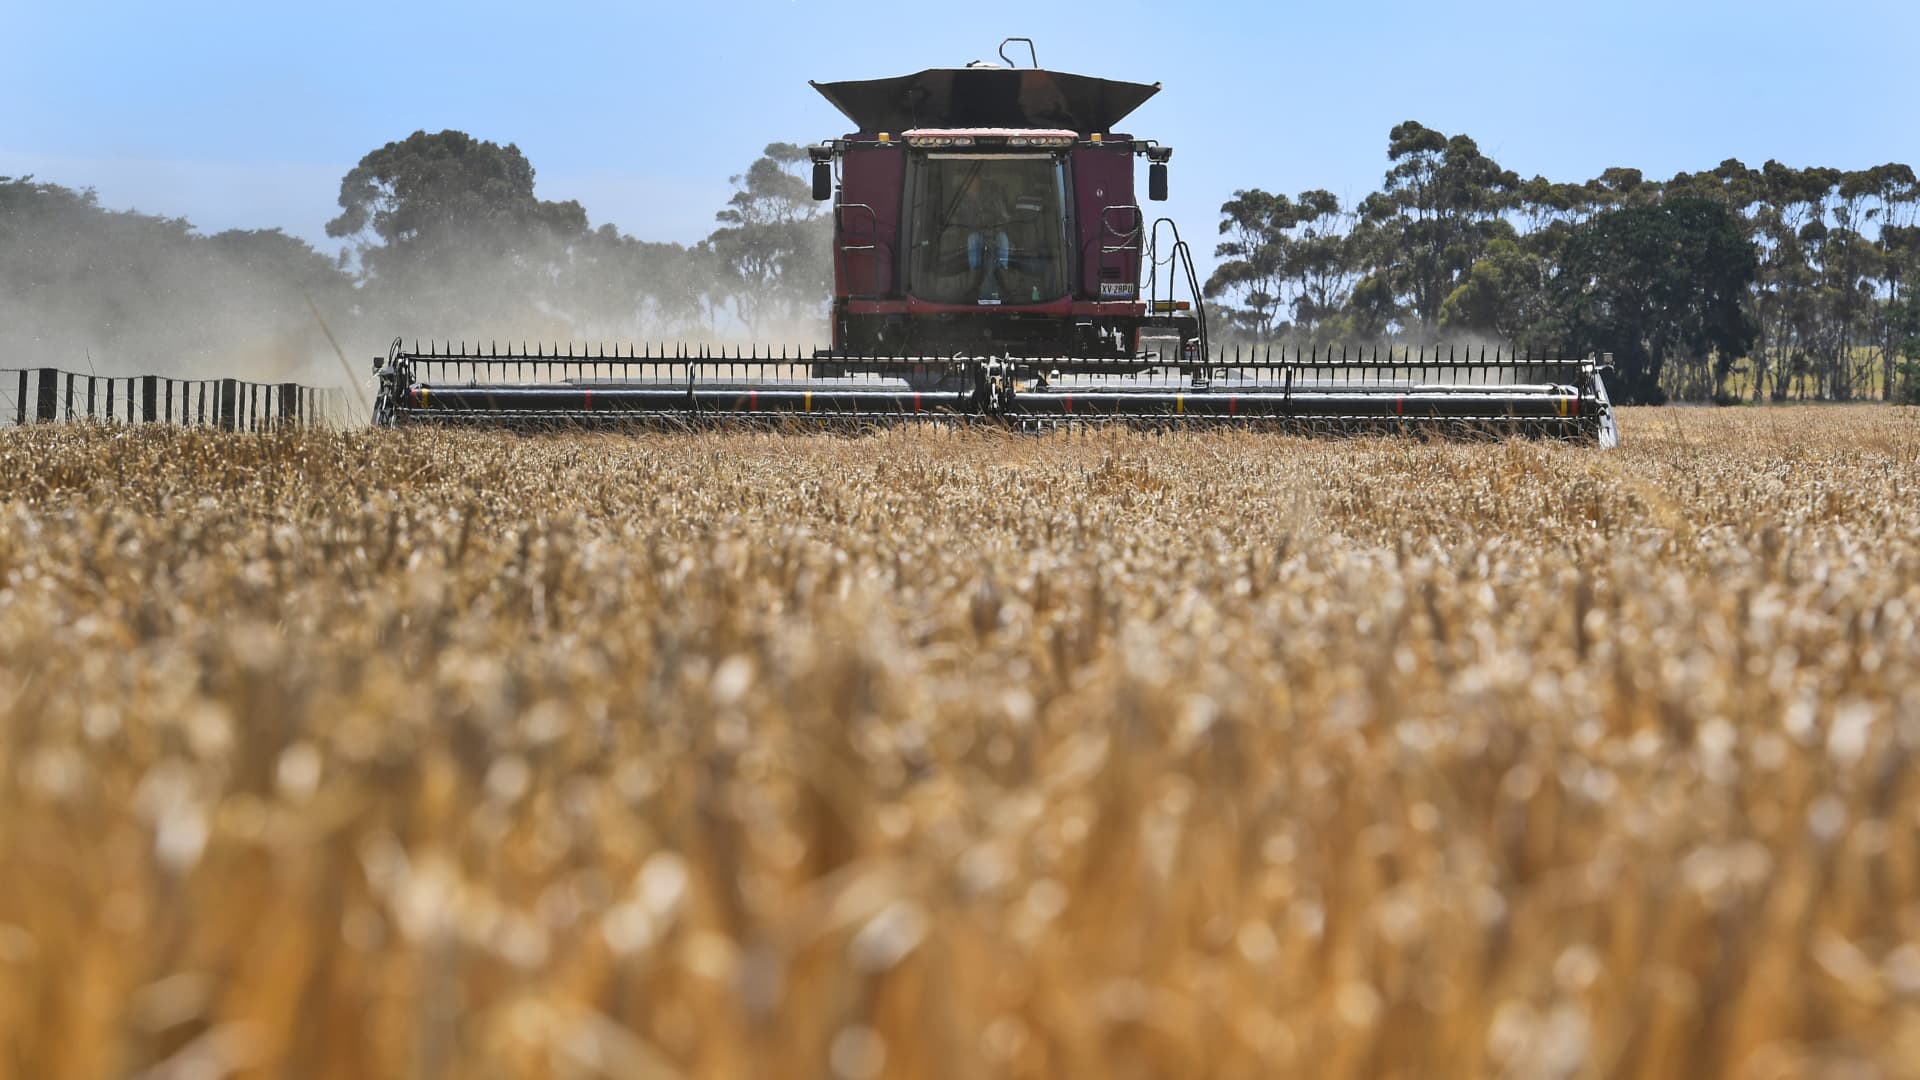 China lifts anti-dumping tariffs on Australian barley after three years, easing present issues